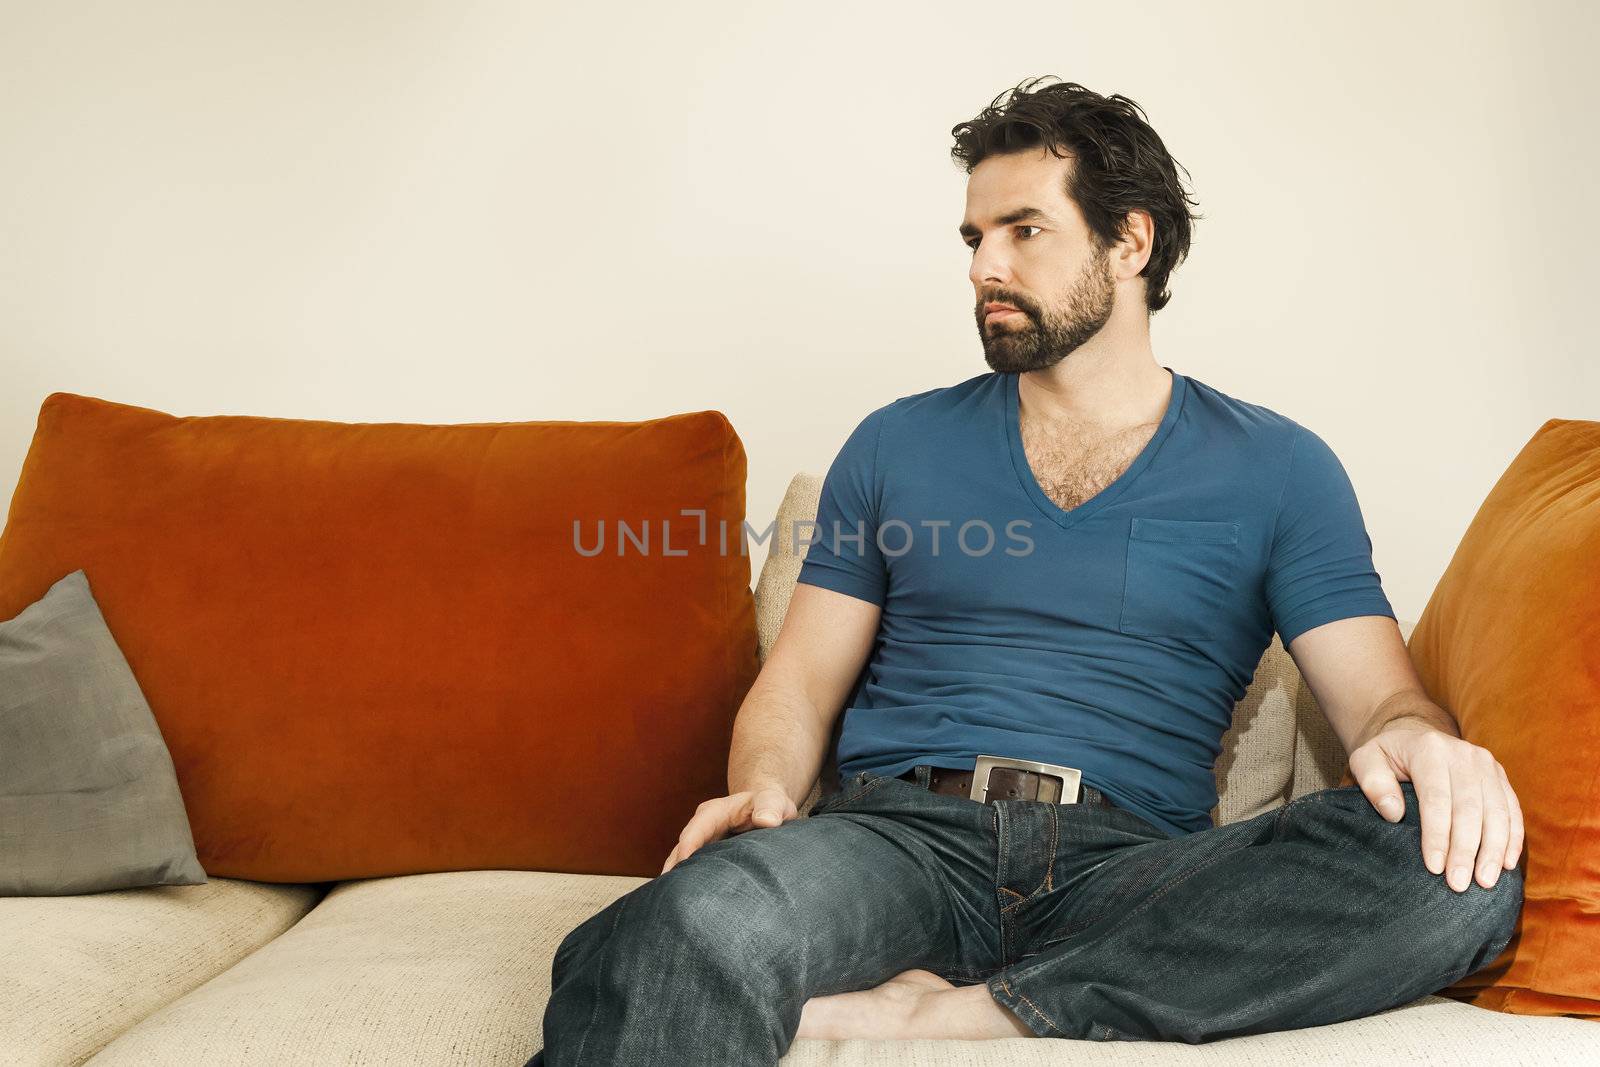 An image of a handsome but depressed man with a beard